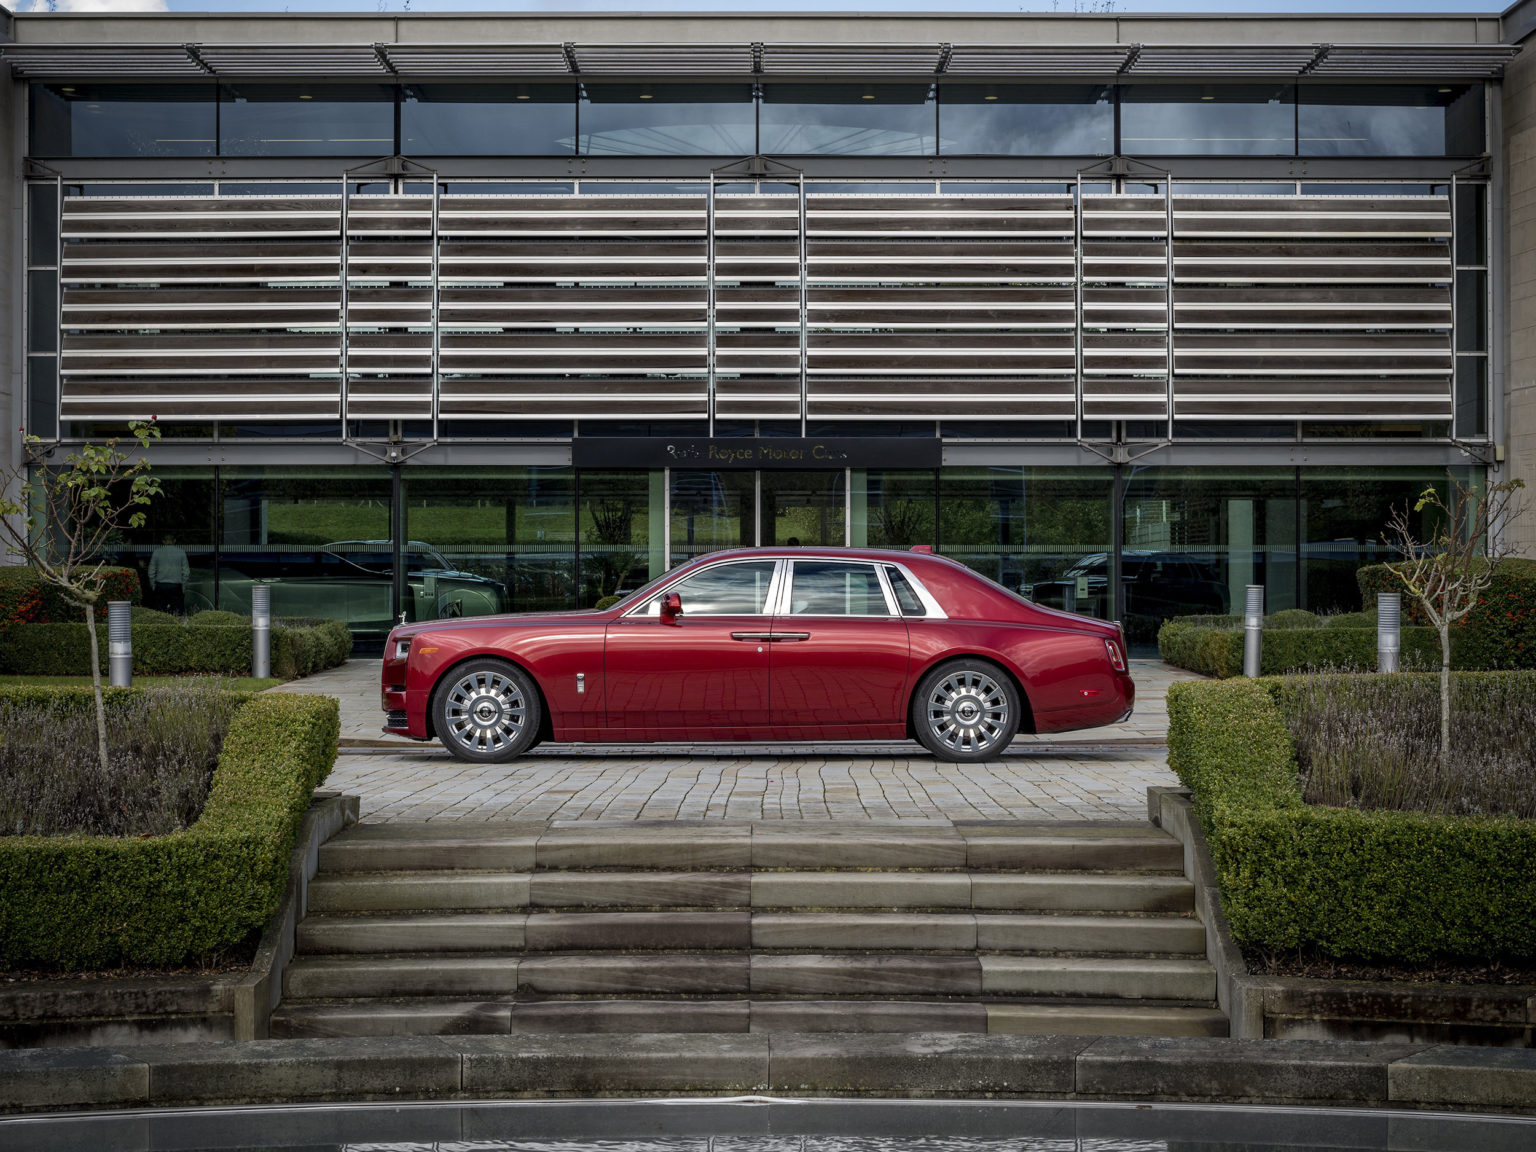 Rolls-Royce has teamed with Sotheby's to auction a bespoke Phantom for charity.